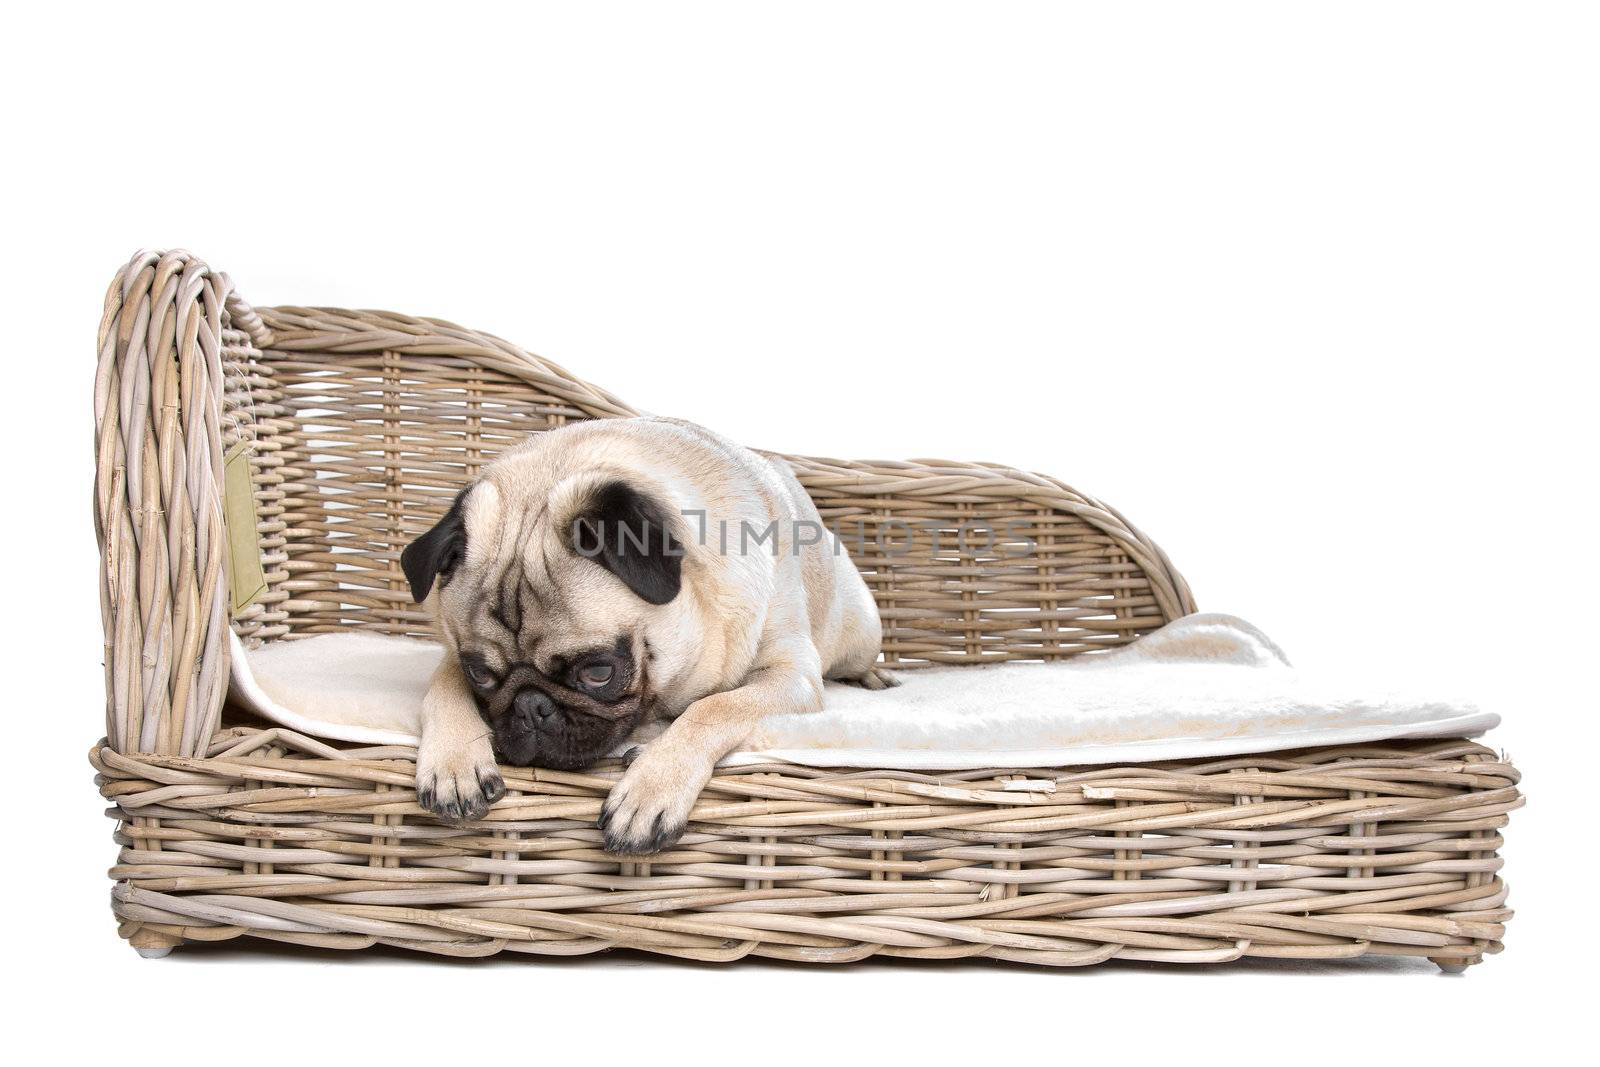 Pug on a luxury bed by eriklam